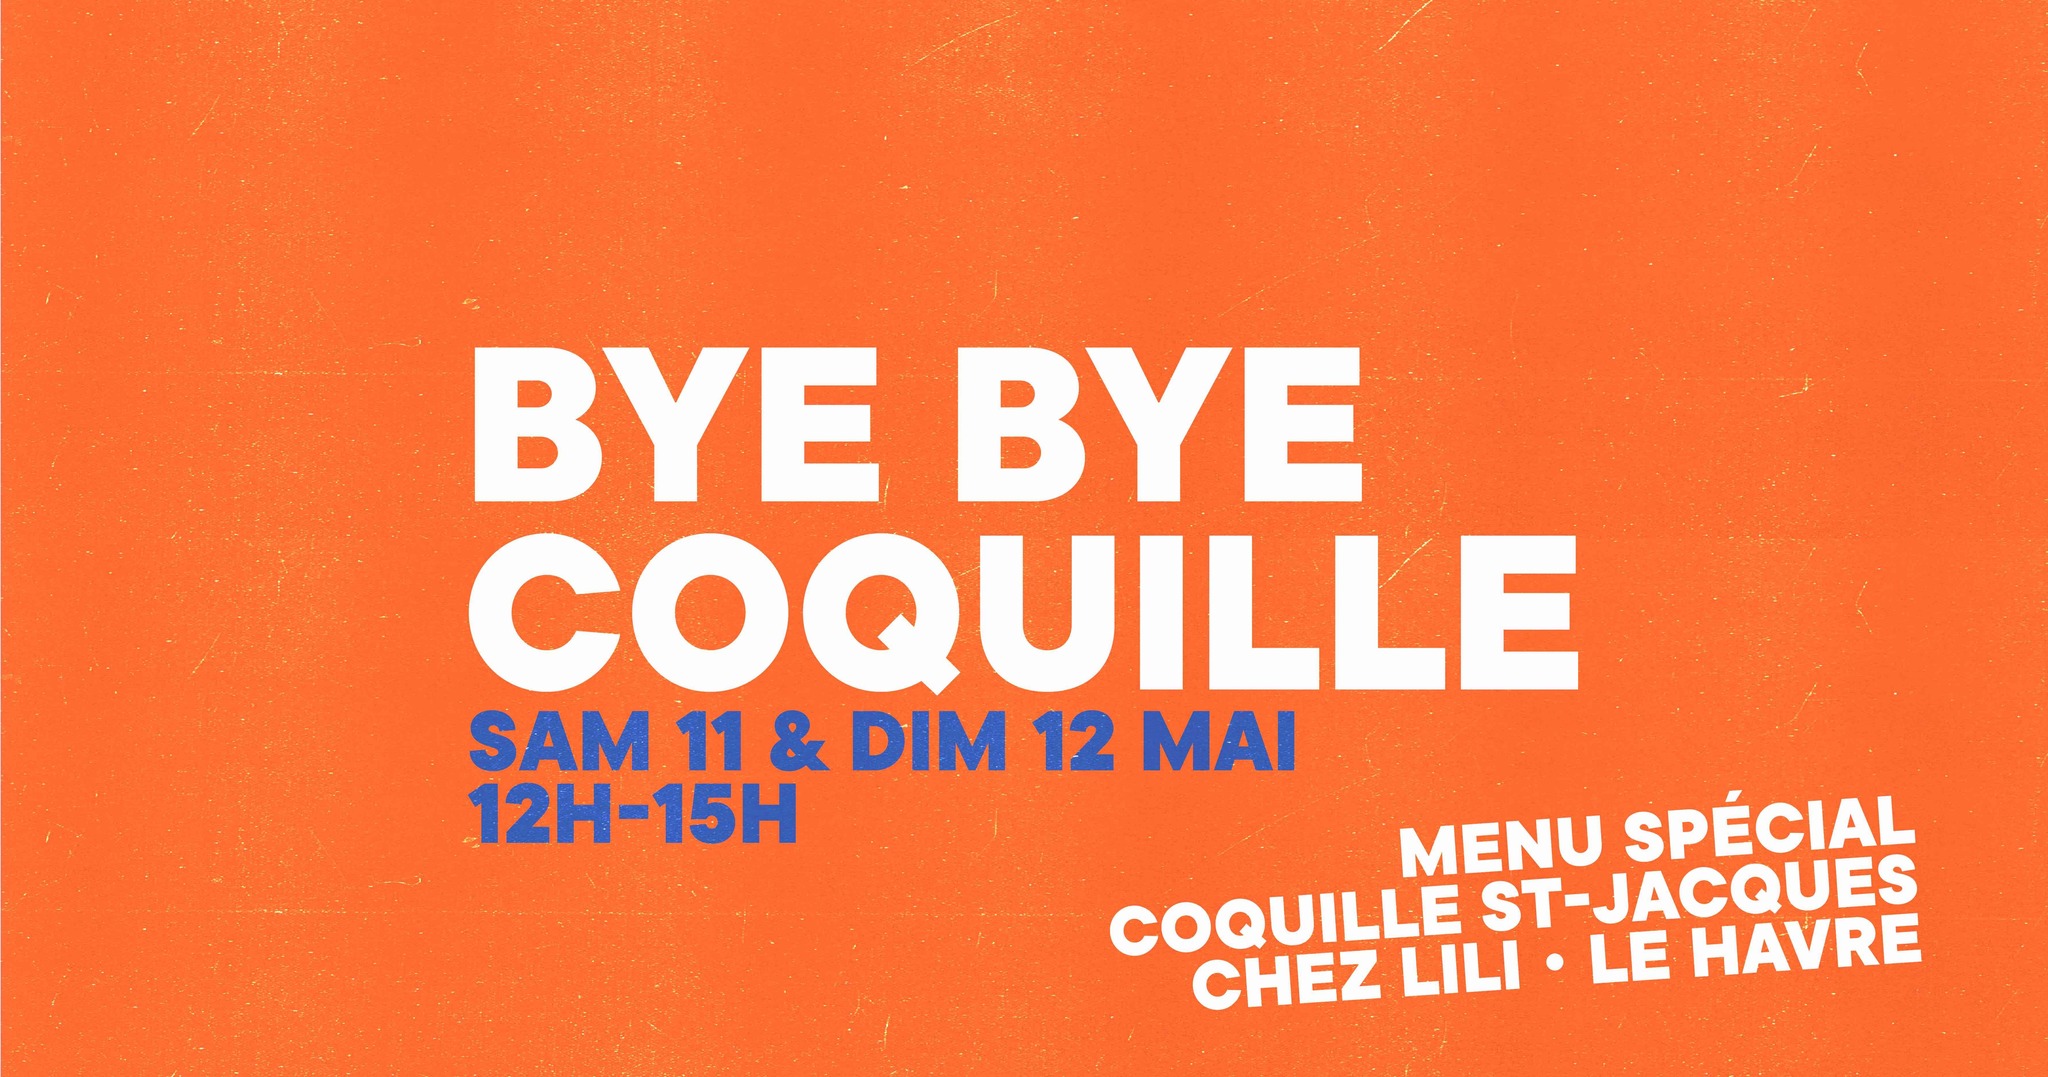 Bye bye coquille !!